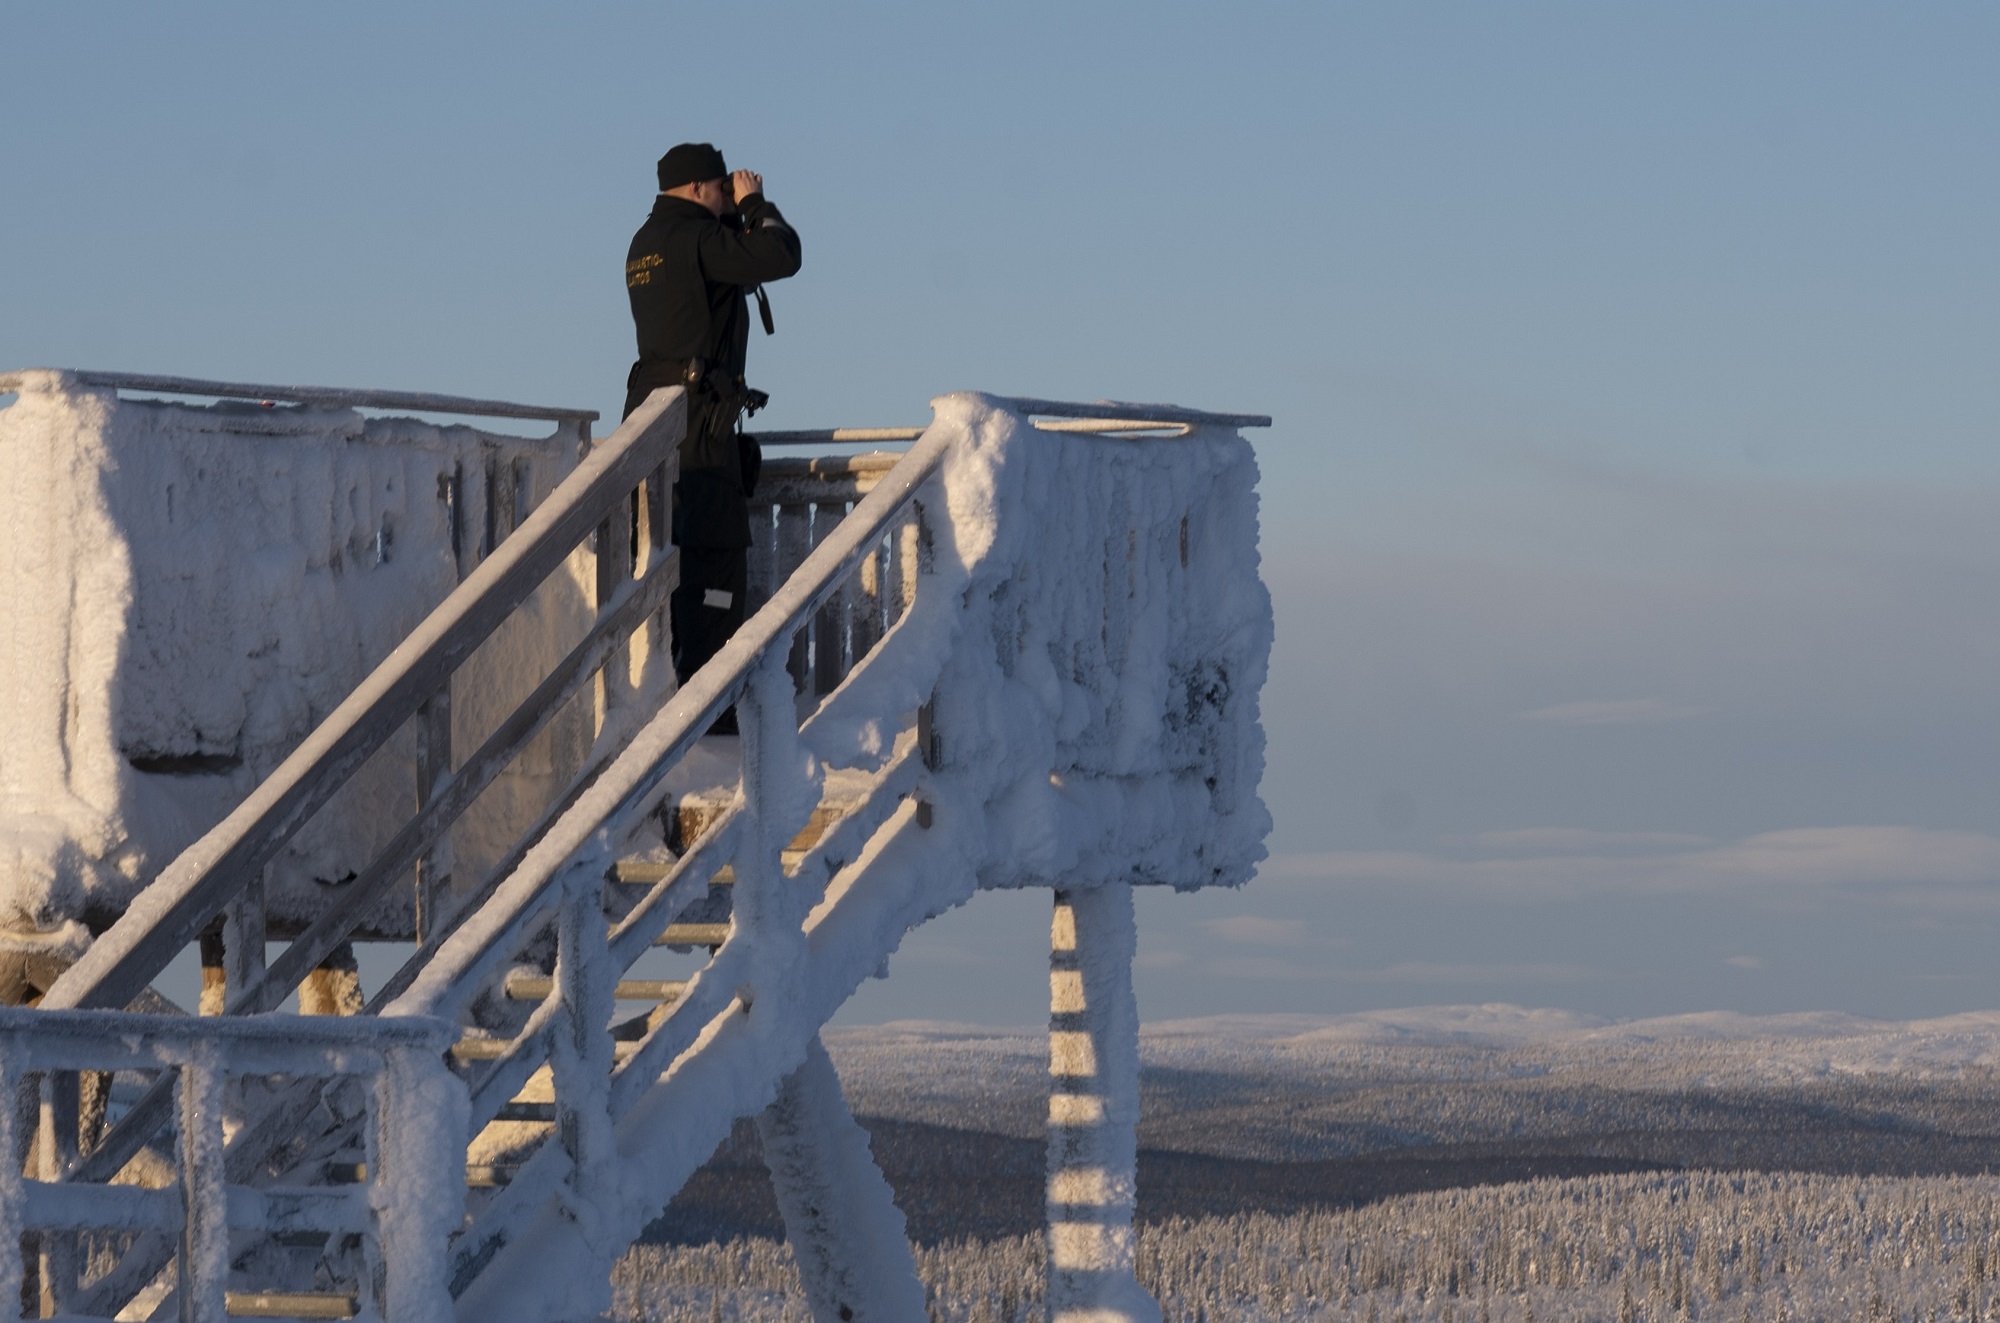 A border guard with binoculars looking out from a snowy observation tower.